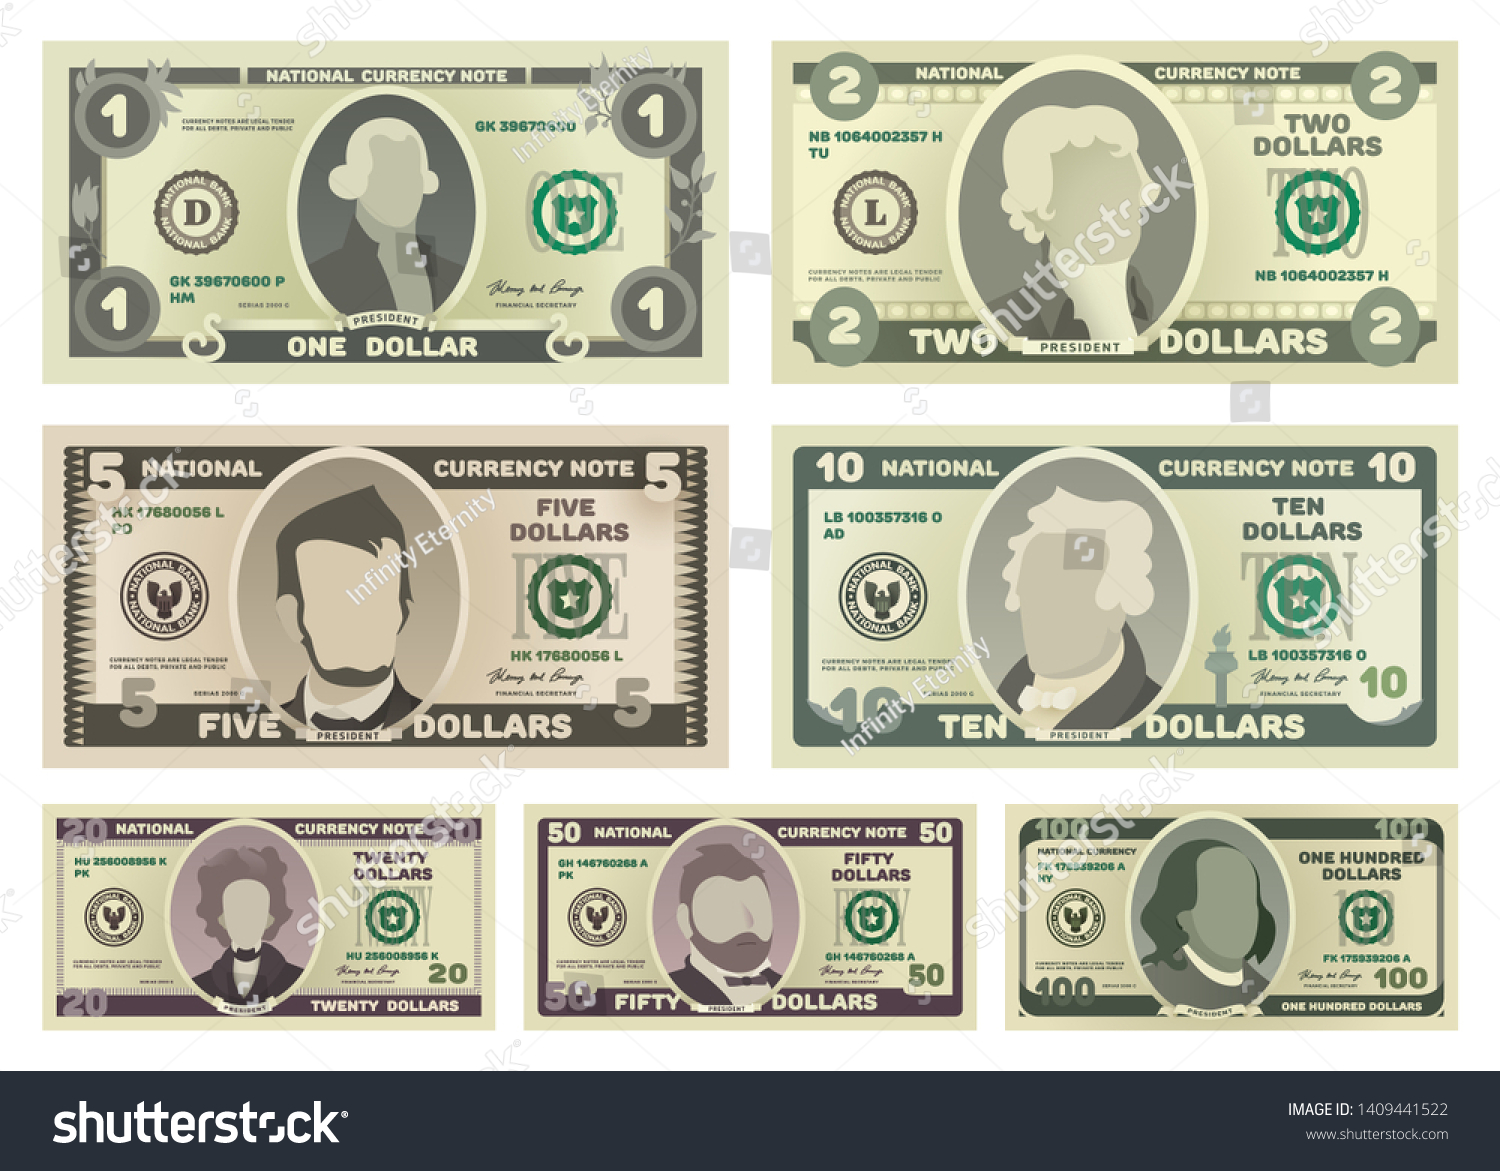 SVG of Vector cartoon dollar banknotes isolated on white background illustration. Every denomination of US currency note. svg